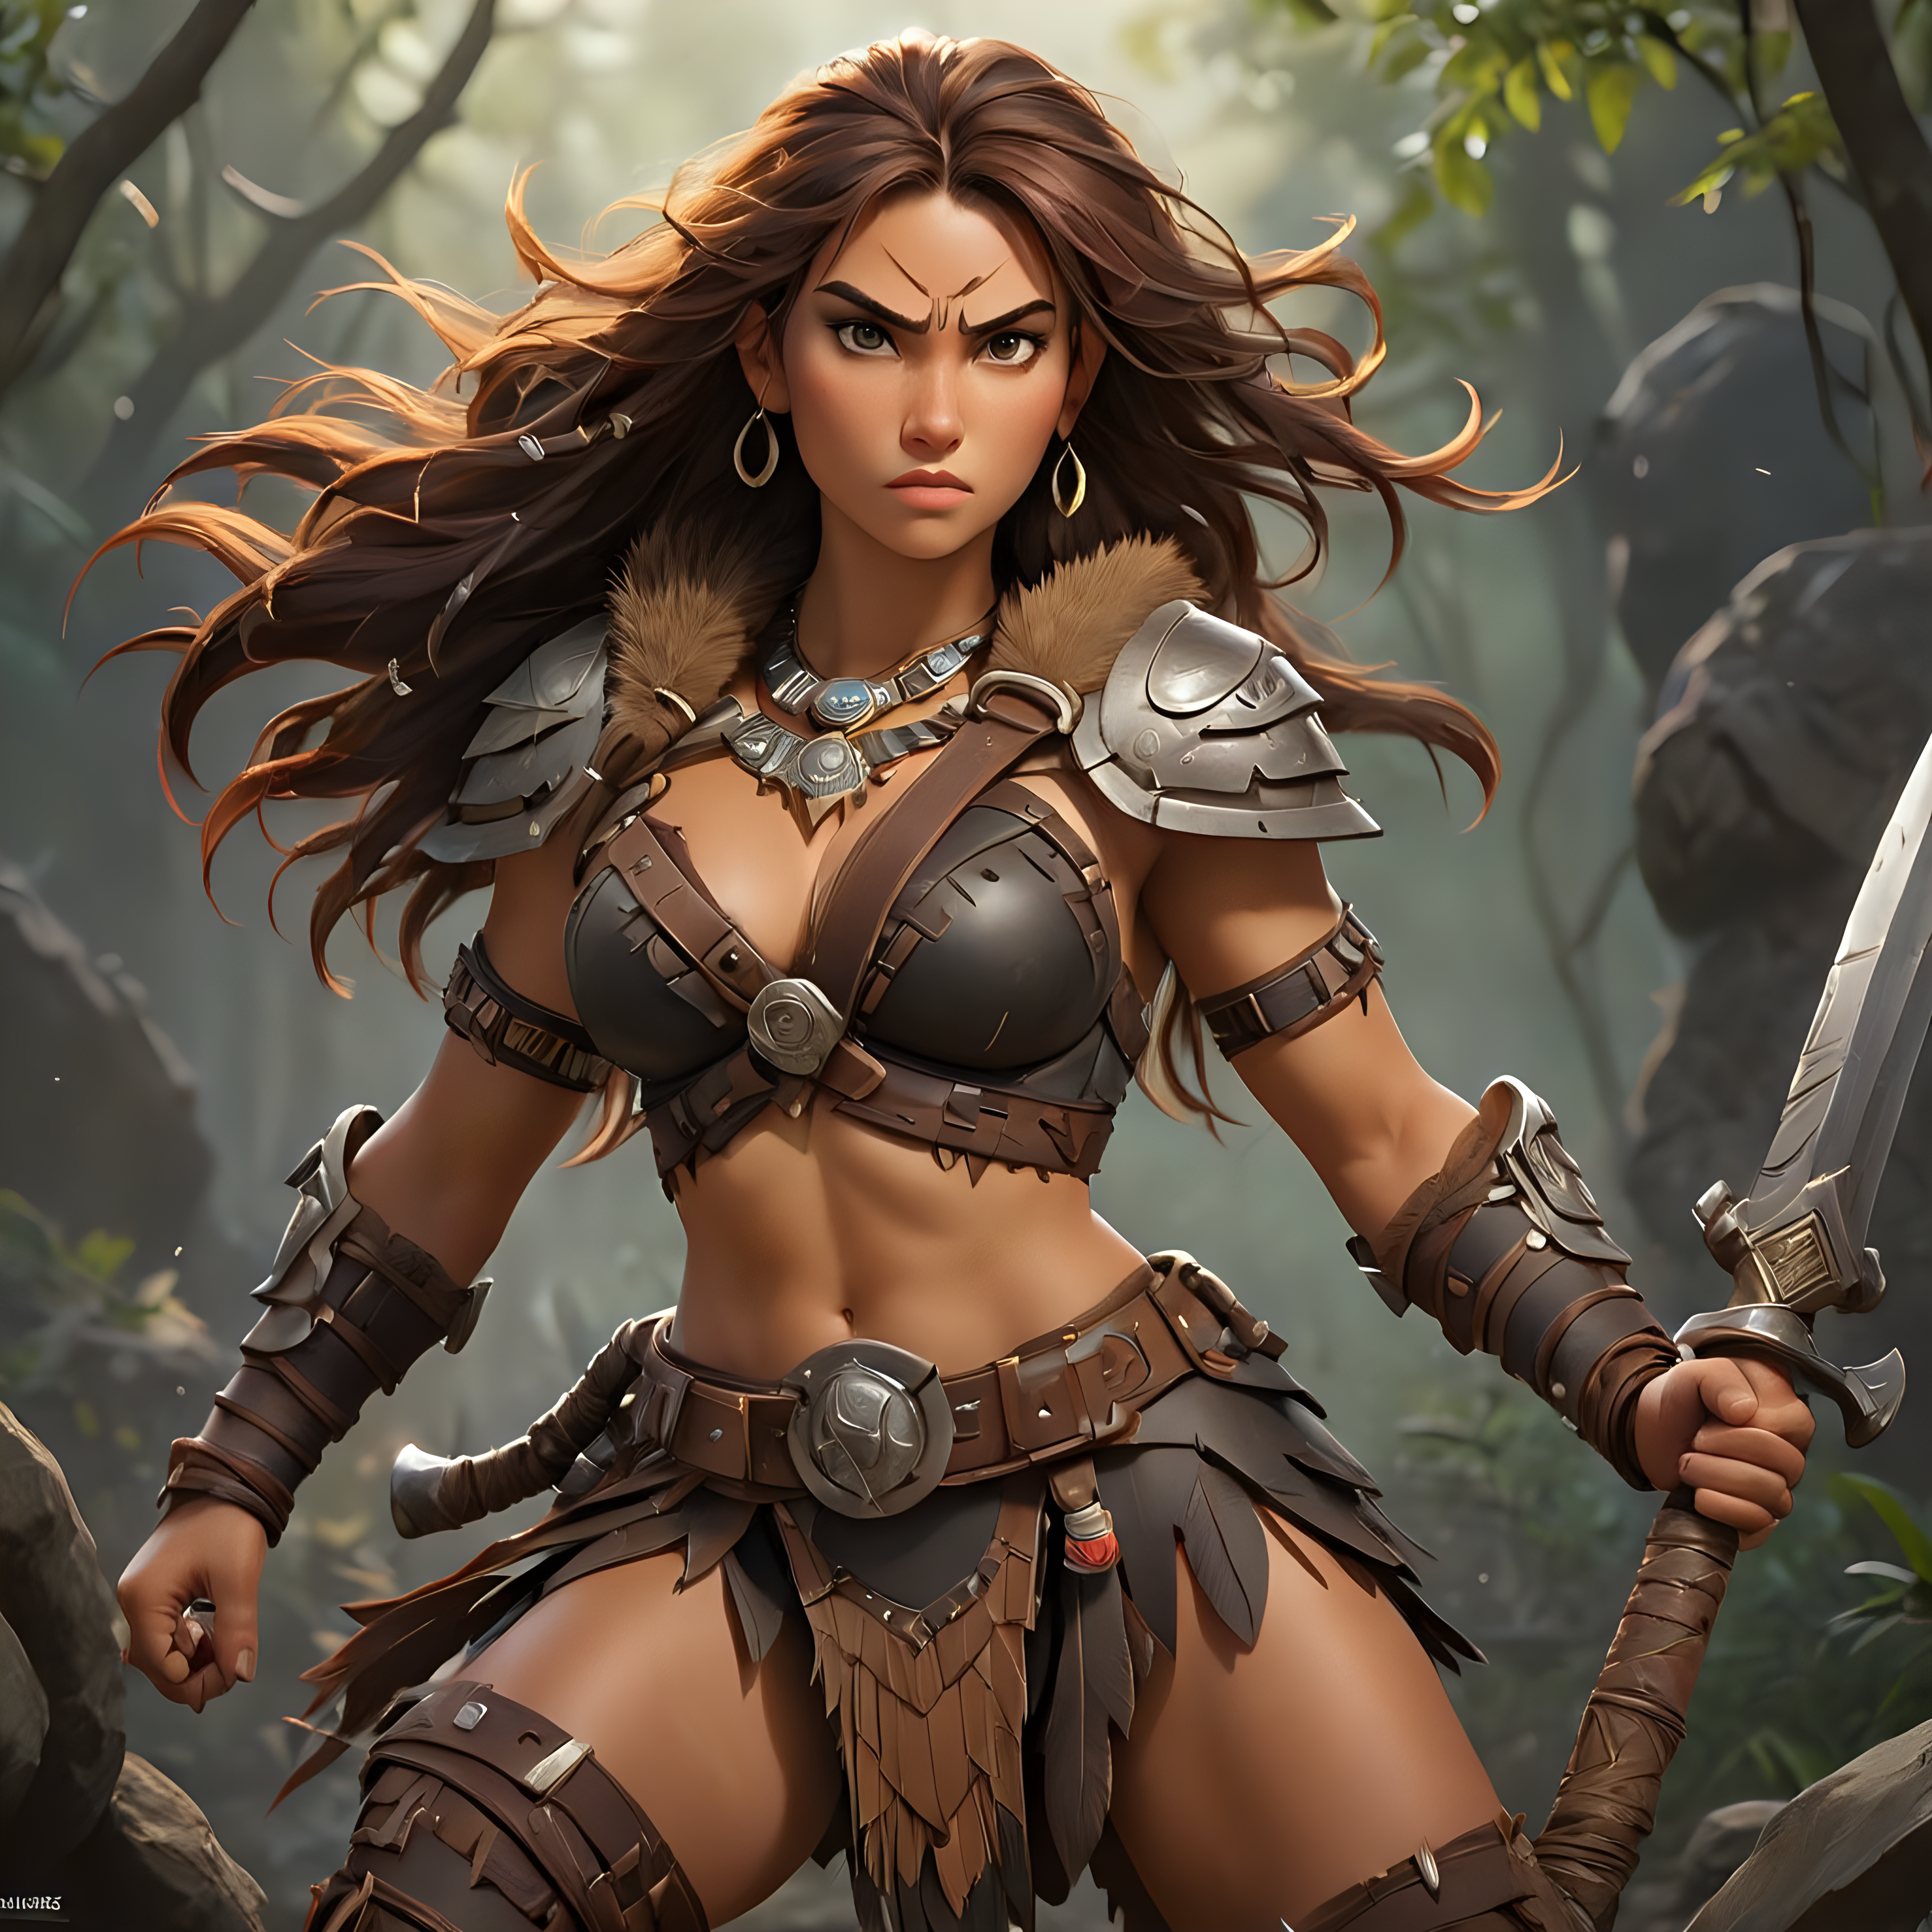 Fearless Barbarian Woman Warrior in Reinforced Leather Armor